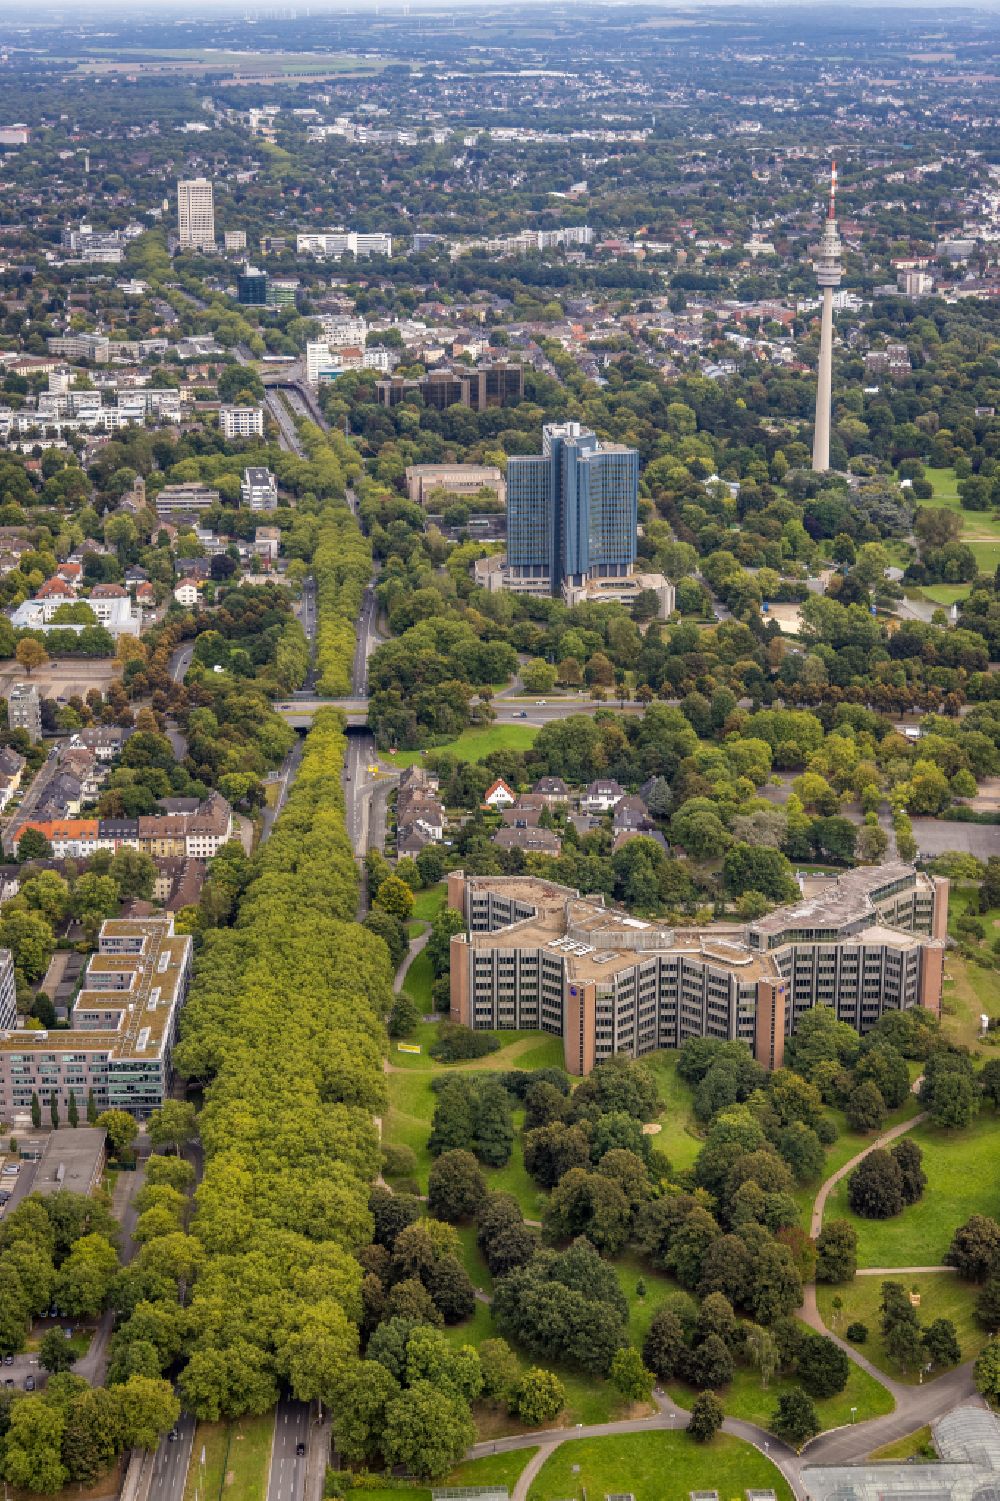 Aerial image Dortmund - City view of the inner city area along the Rheinlanddamm in the district Ruhrallee Ost in Dortmund in the Ruhr area in the state North Rhine-Westphalia, Germany